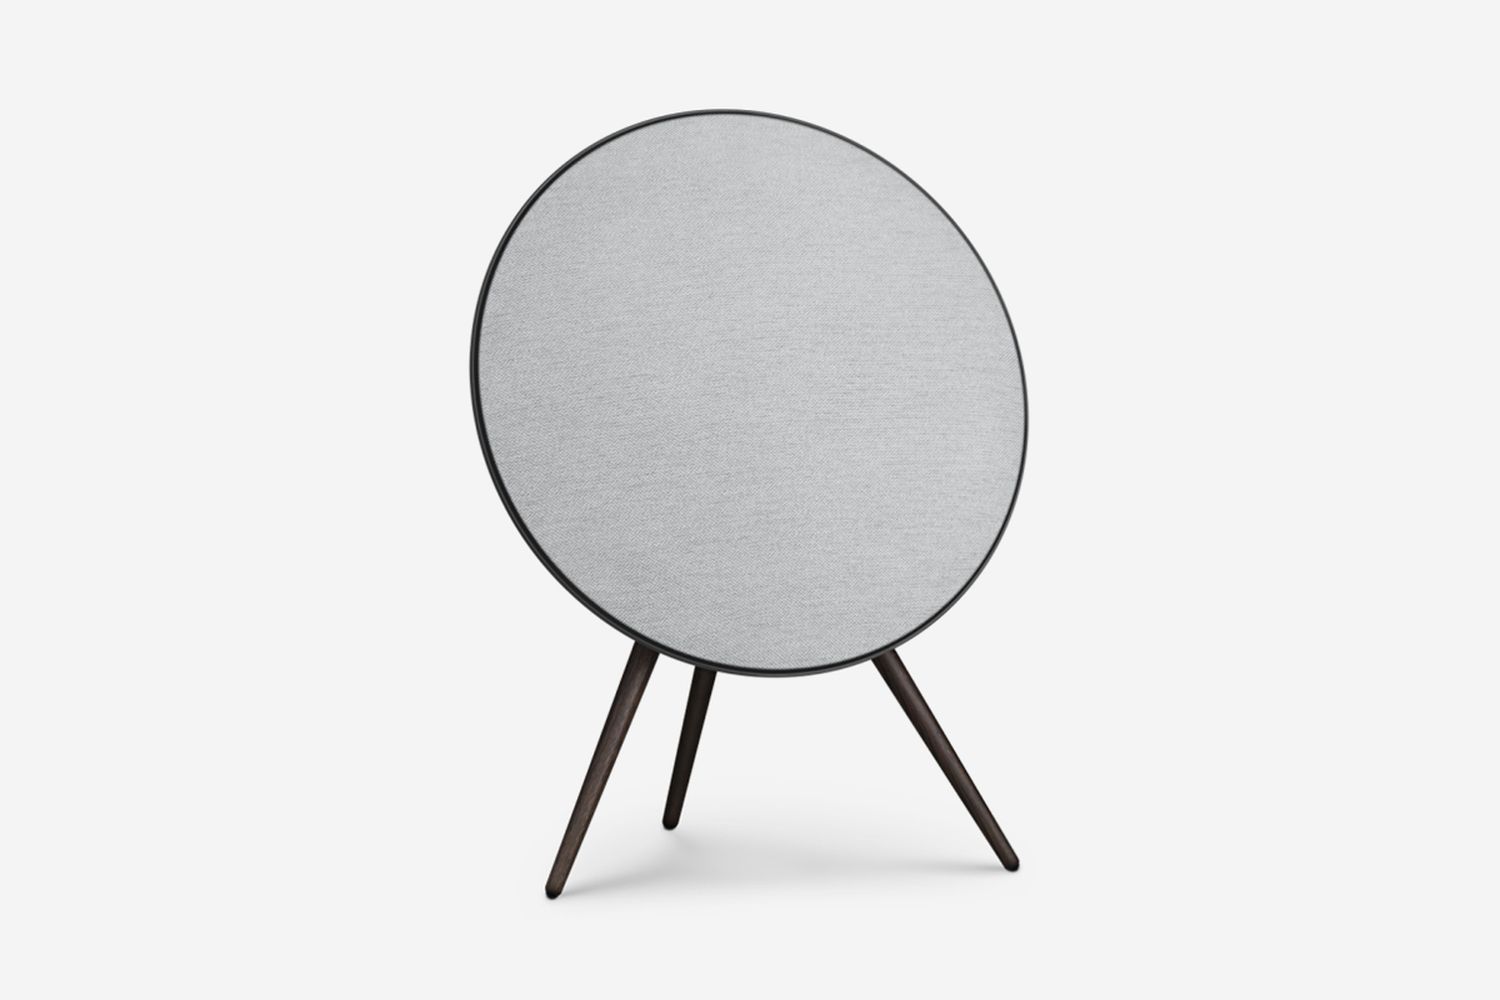 Beoplay A9 with the Google Assistant